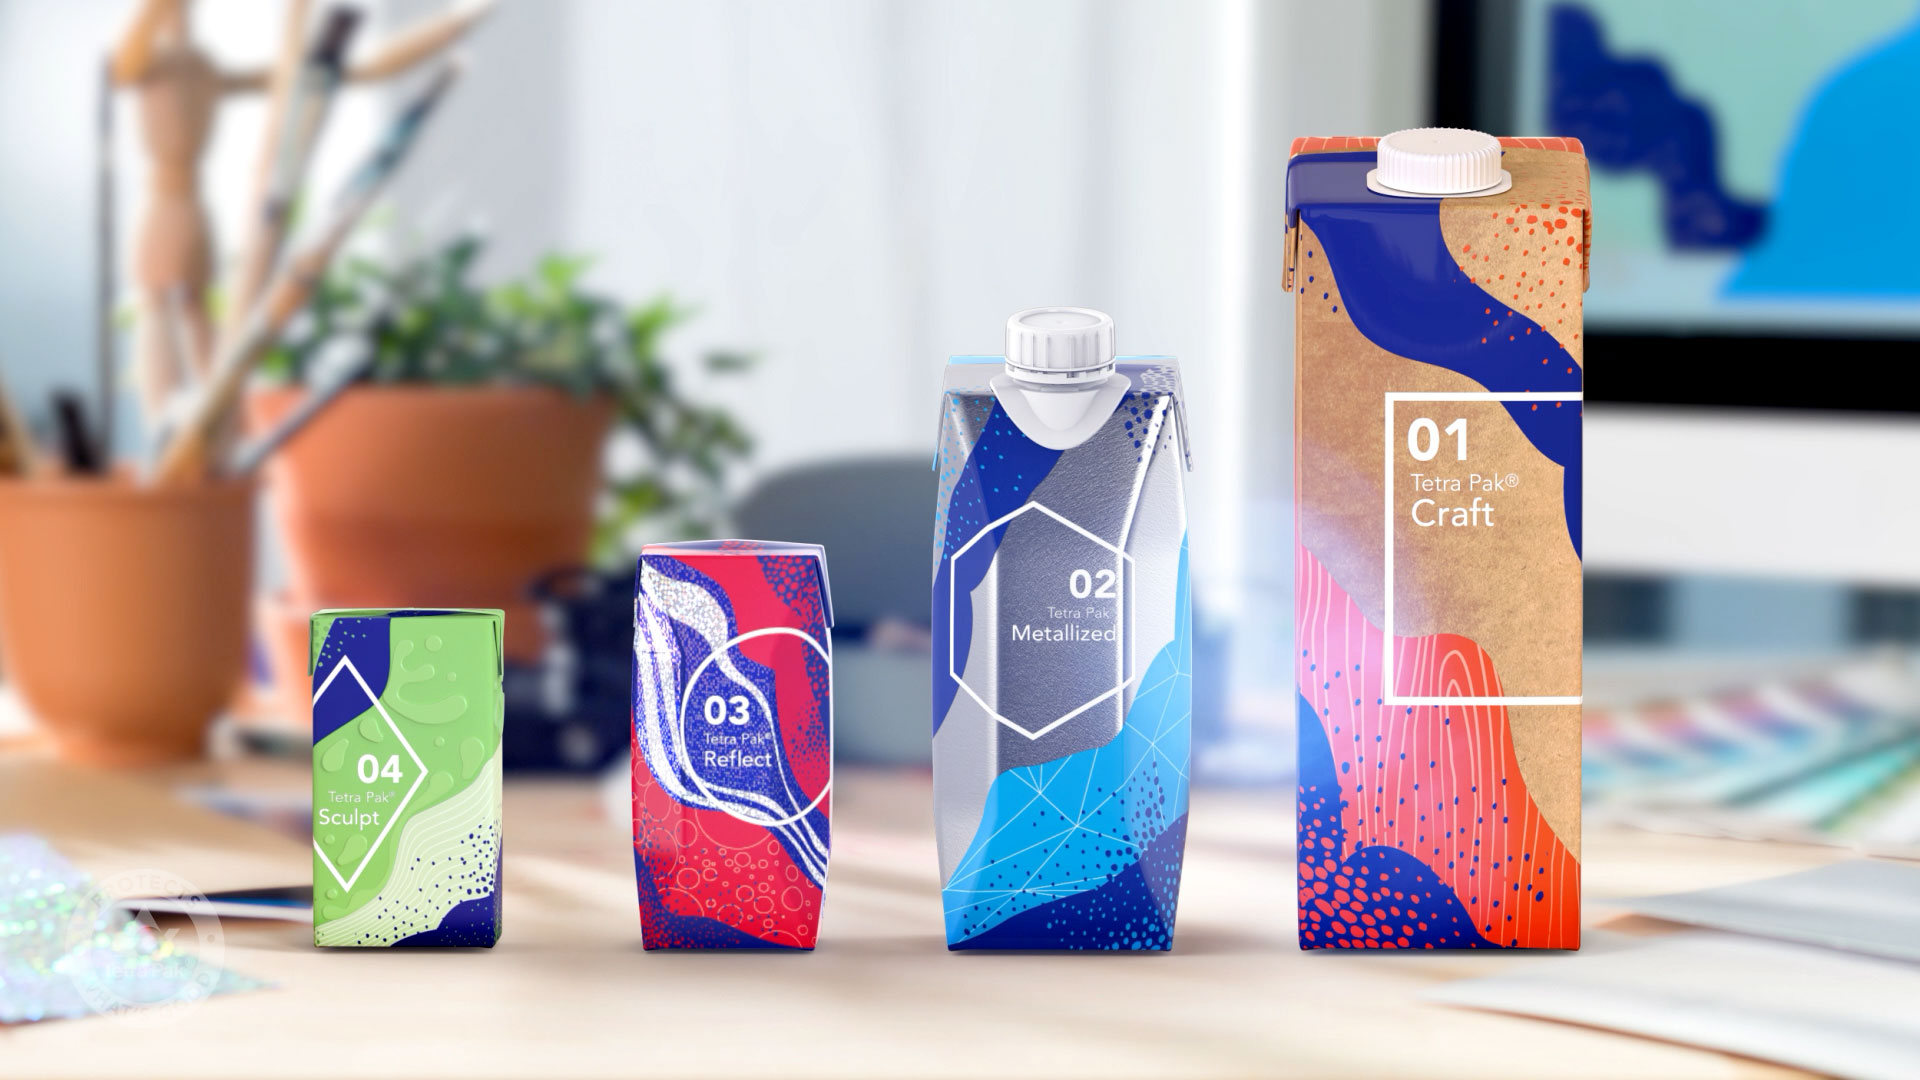 Tetra Pak from strategy to campaign KAN